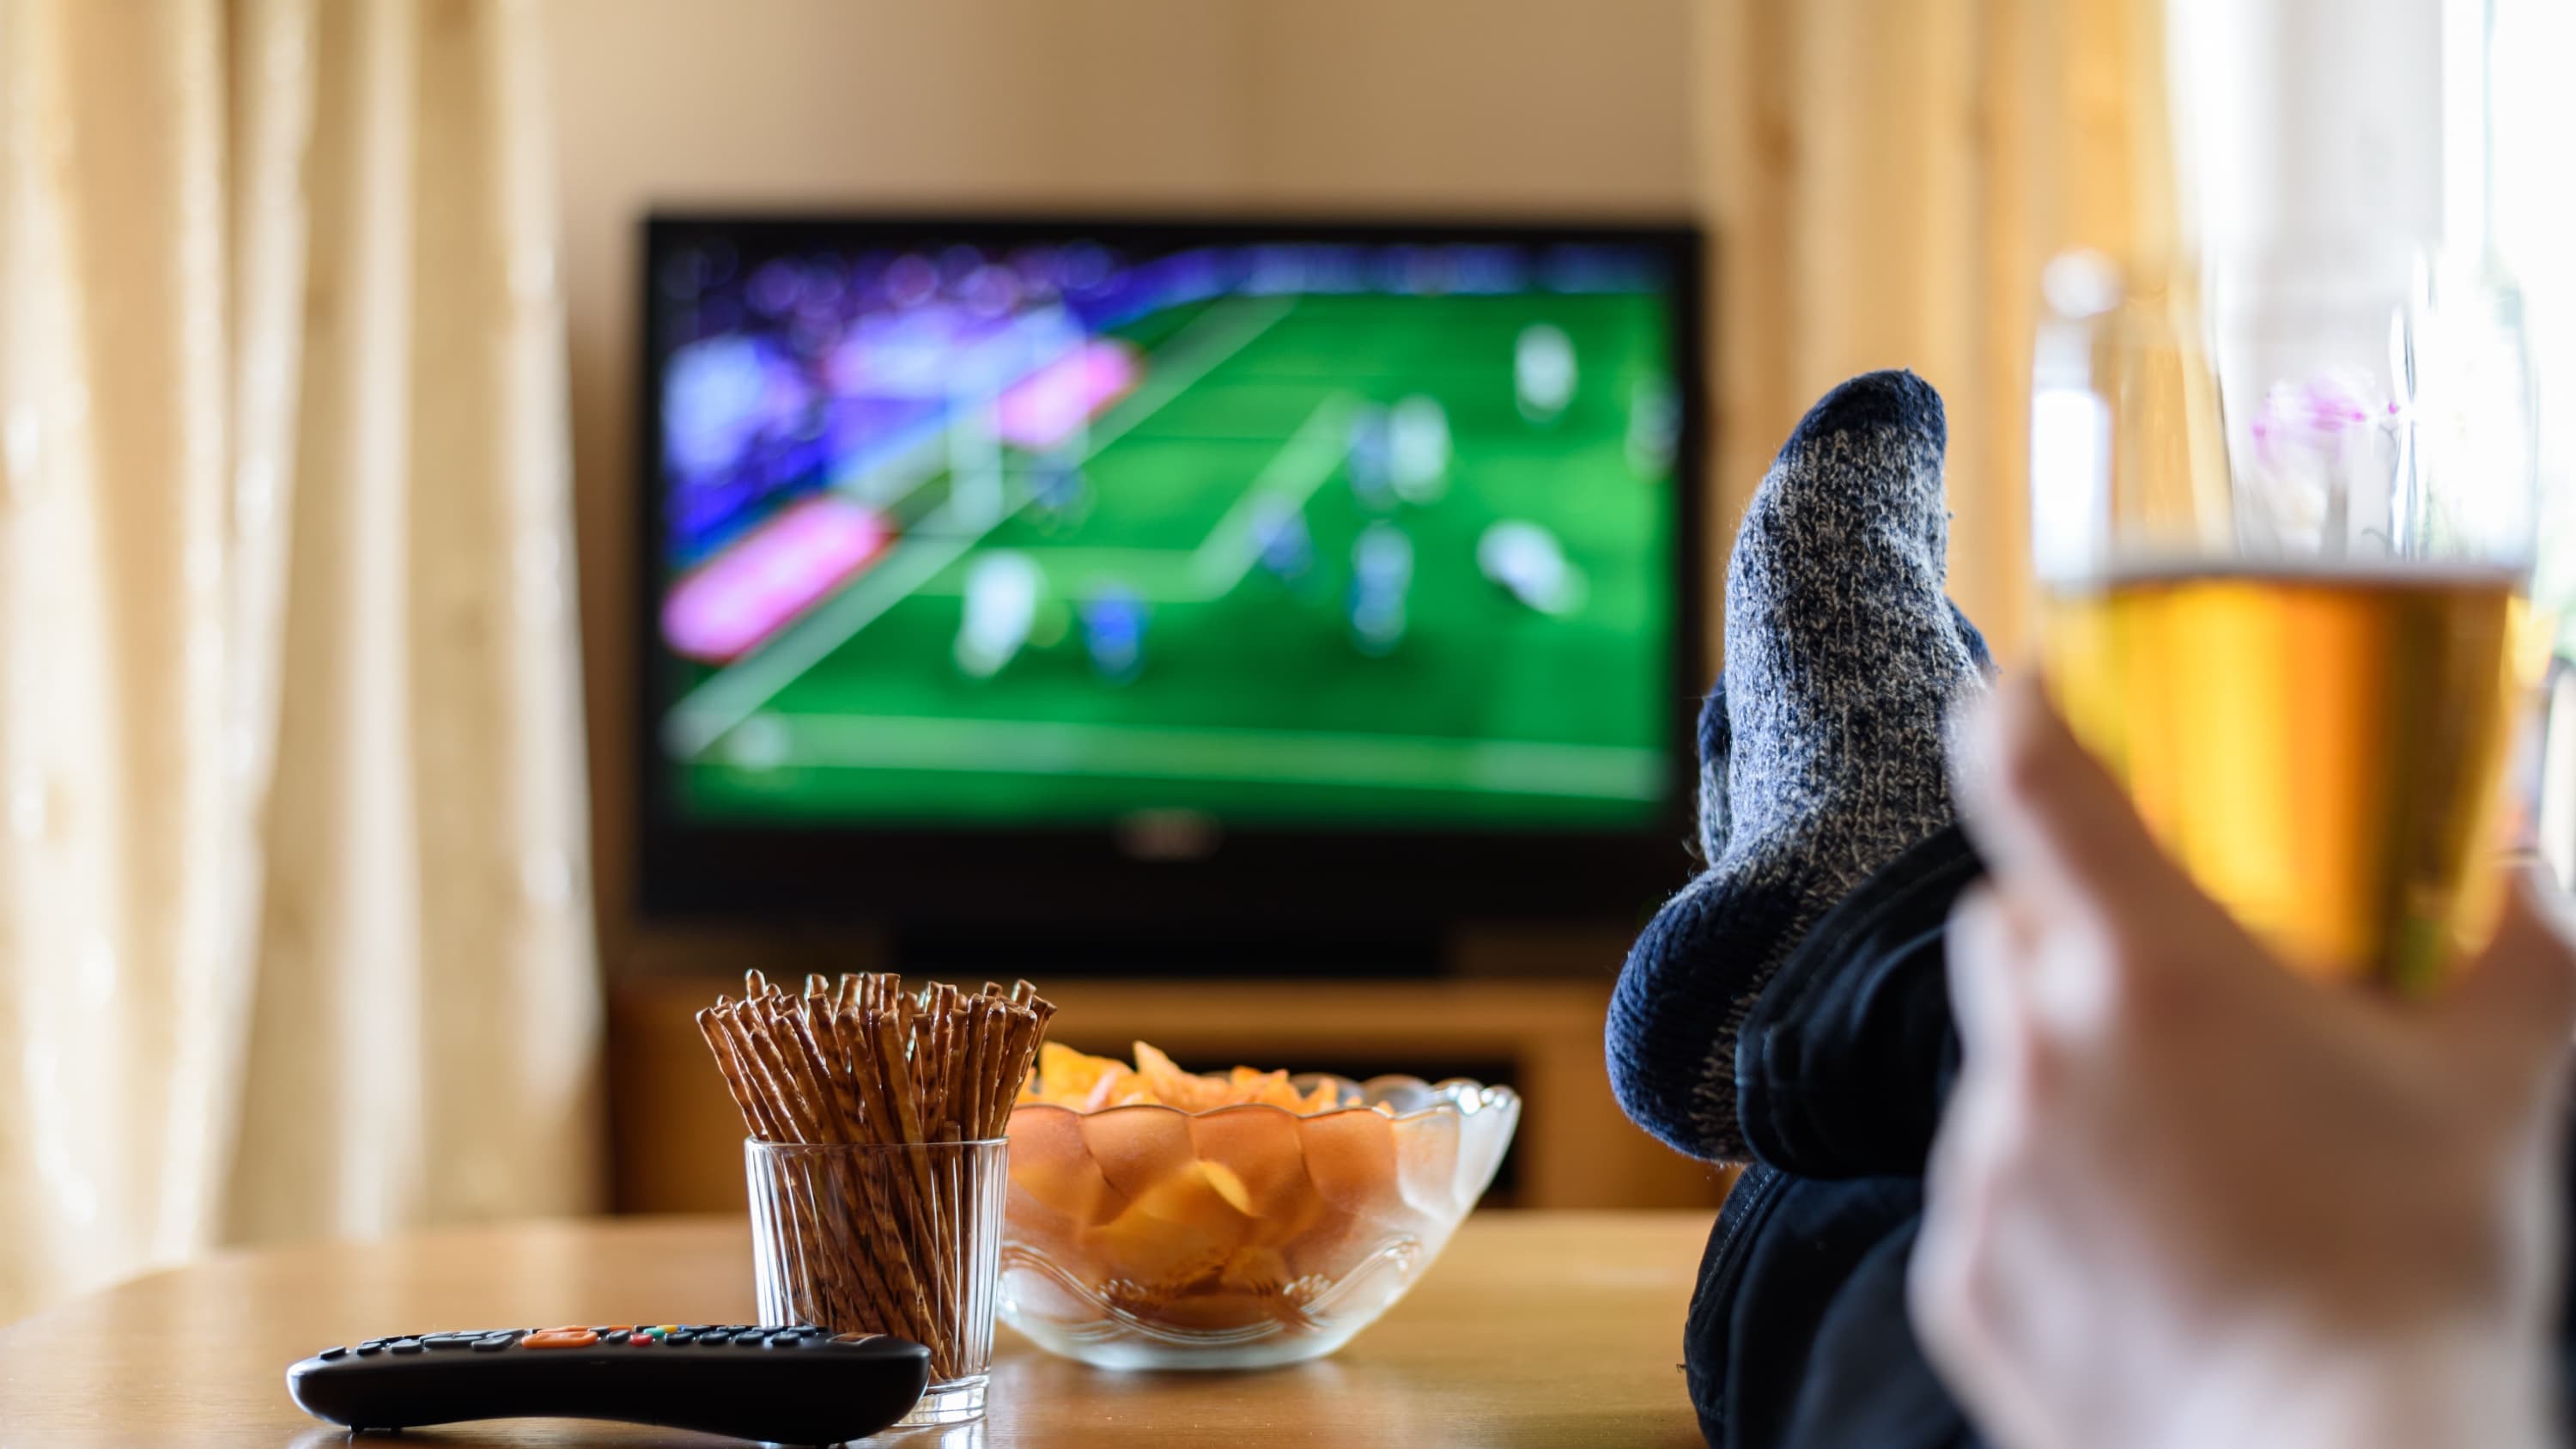 person watching TV with a beer and chips, possibly at risk for prediabetes